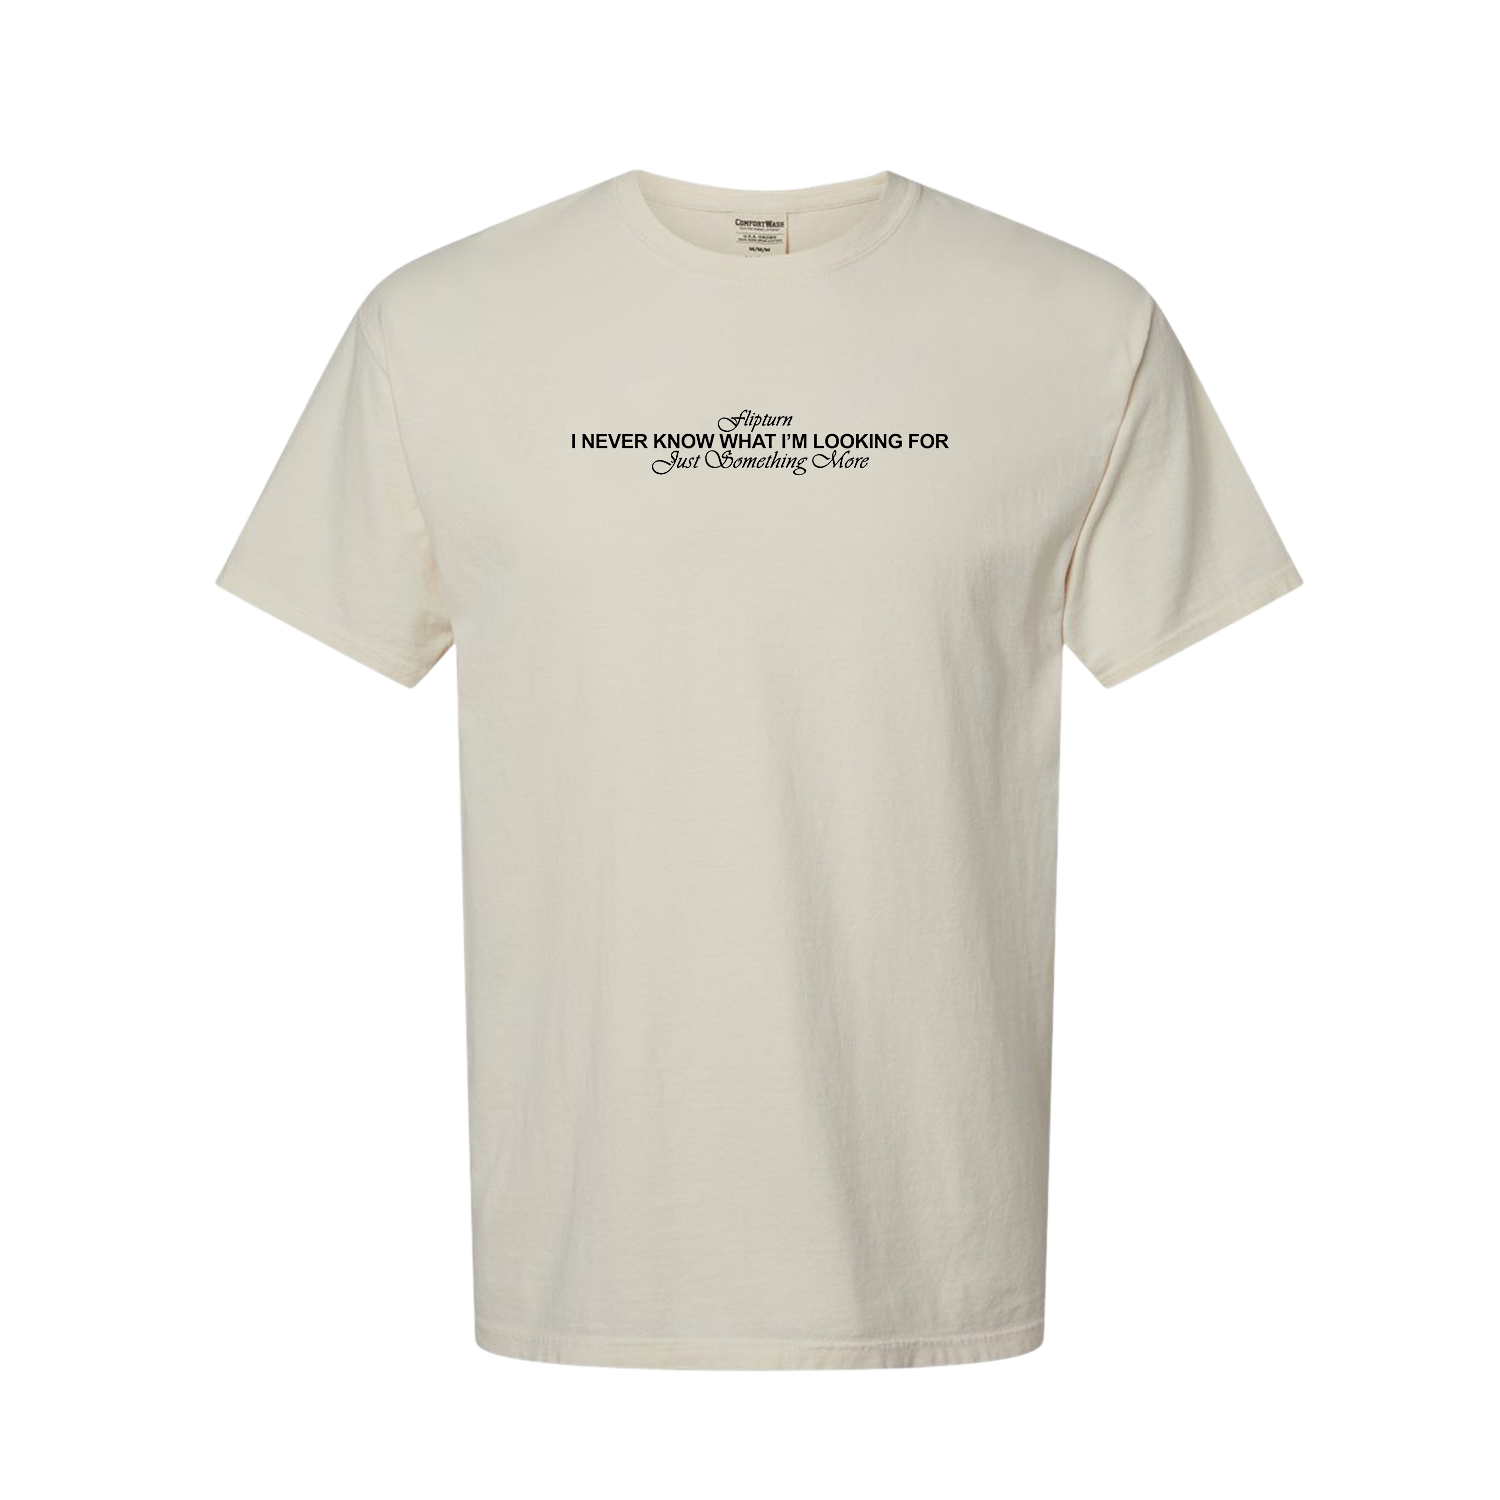 The Something More T-Shirt